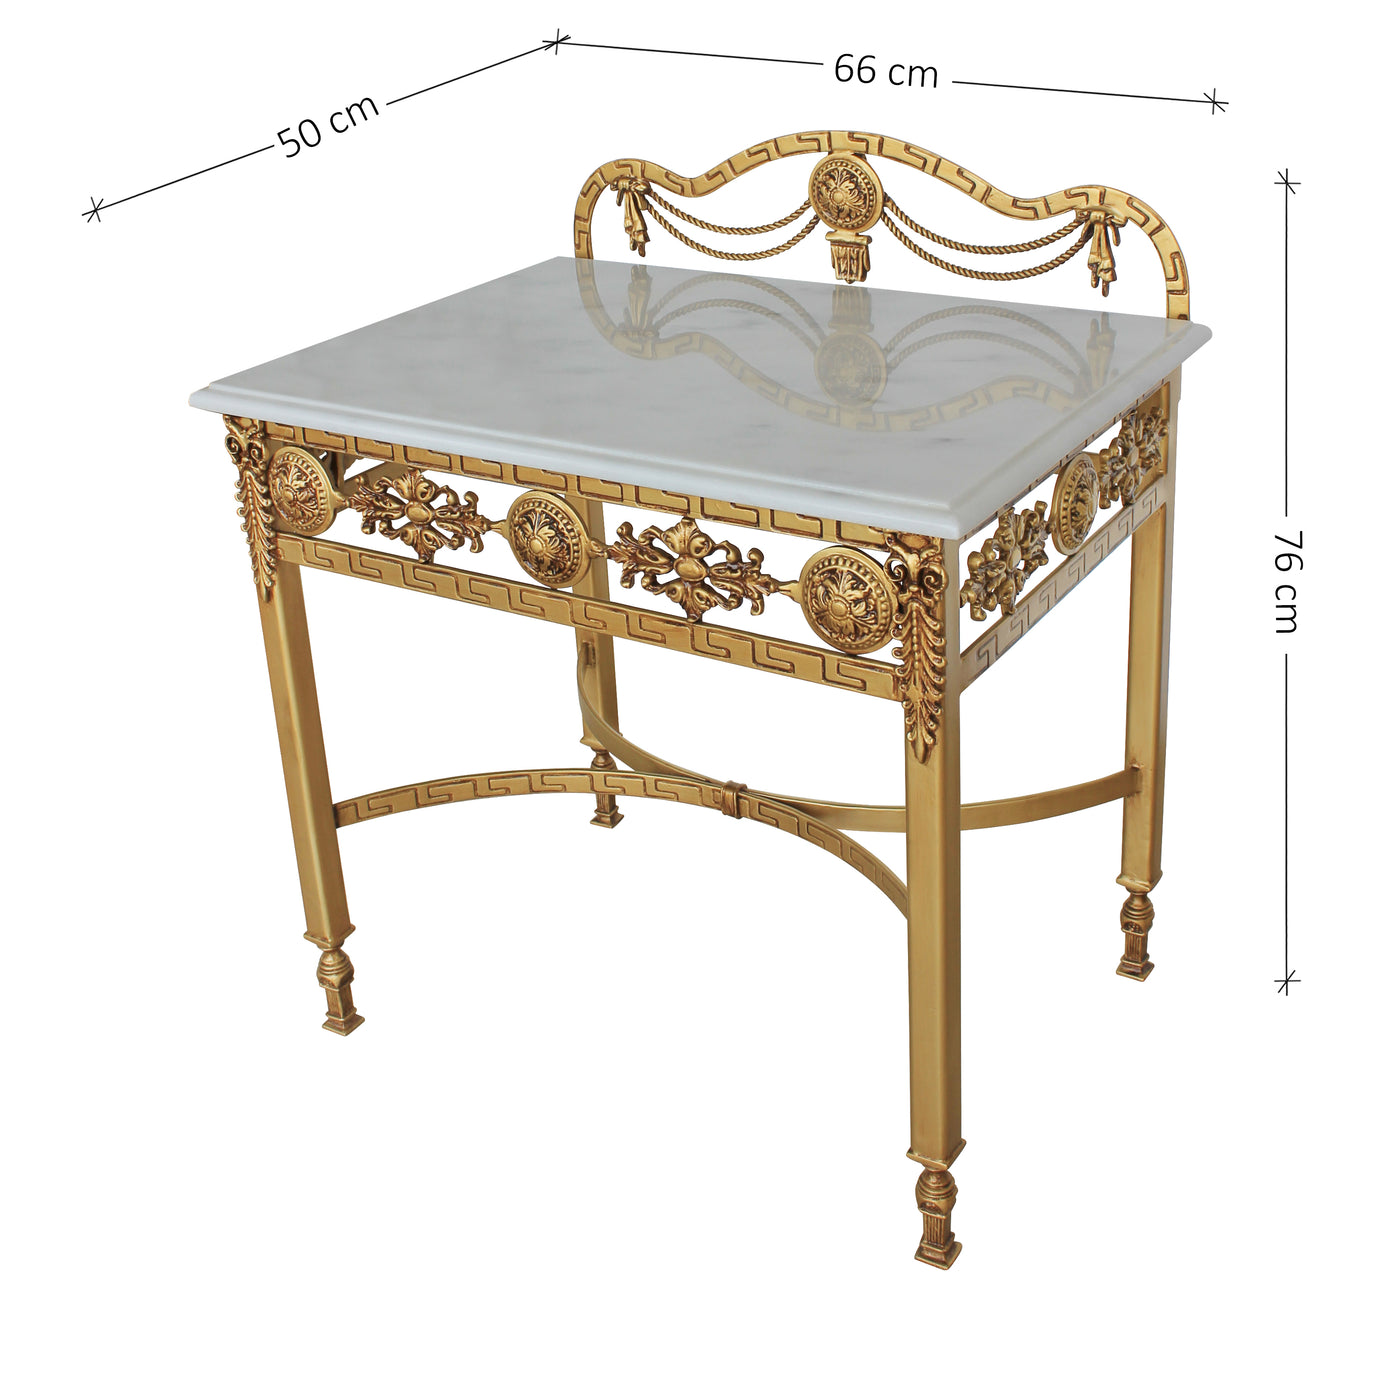 A luxurious night table with white marble top, with annotated dimensions